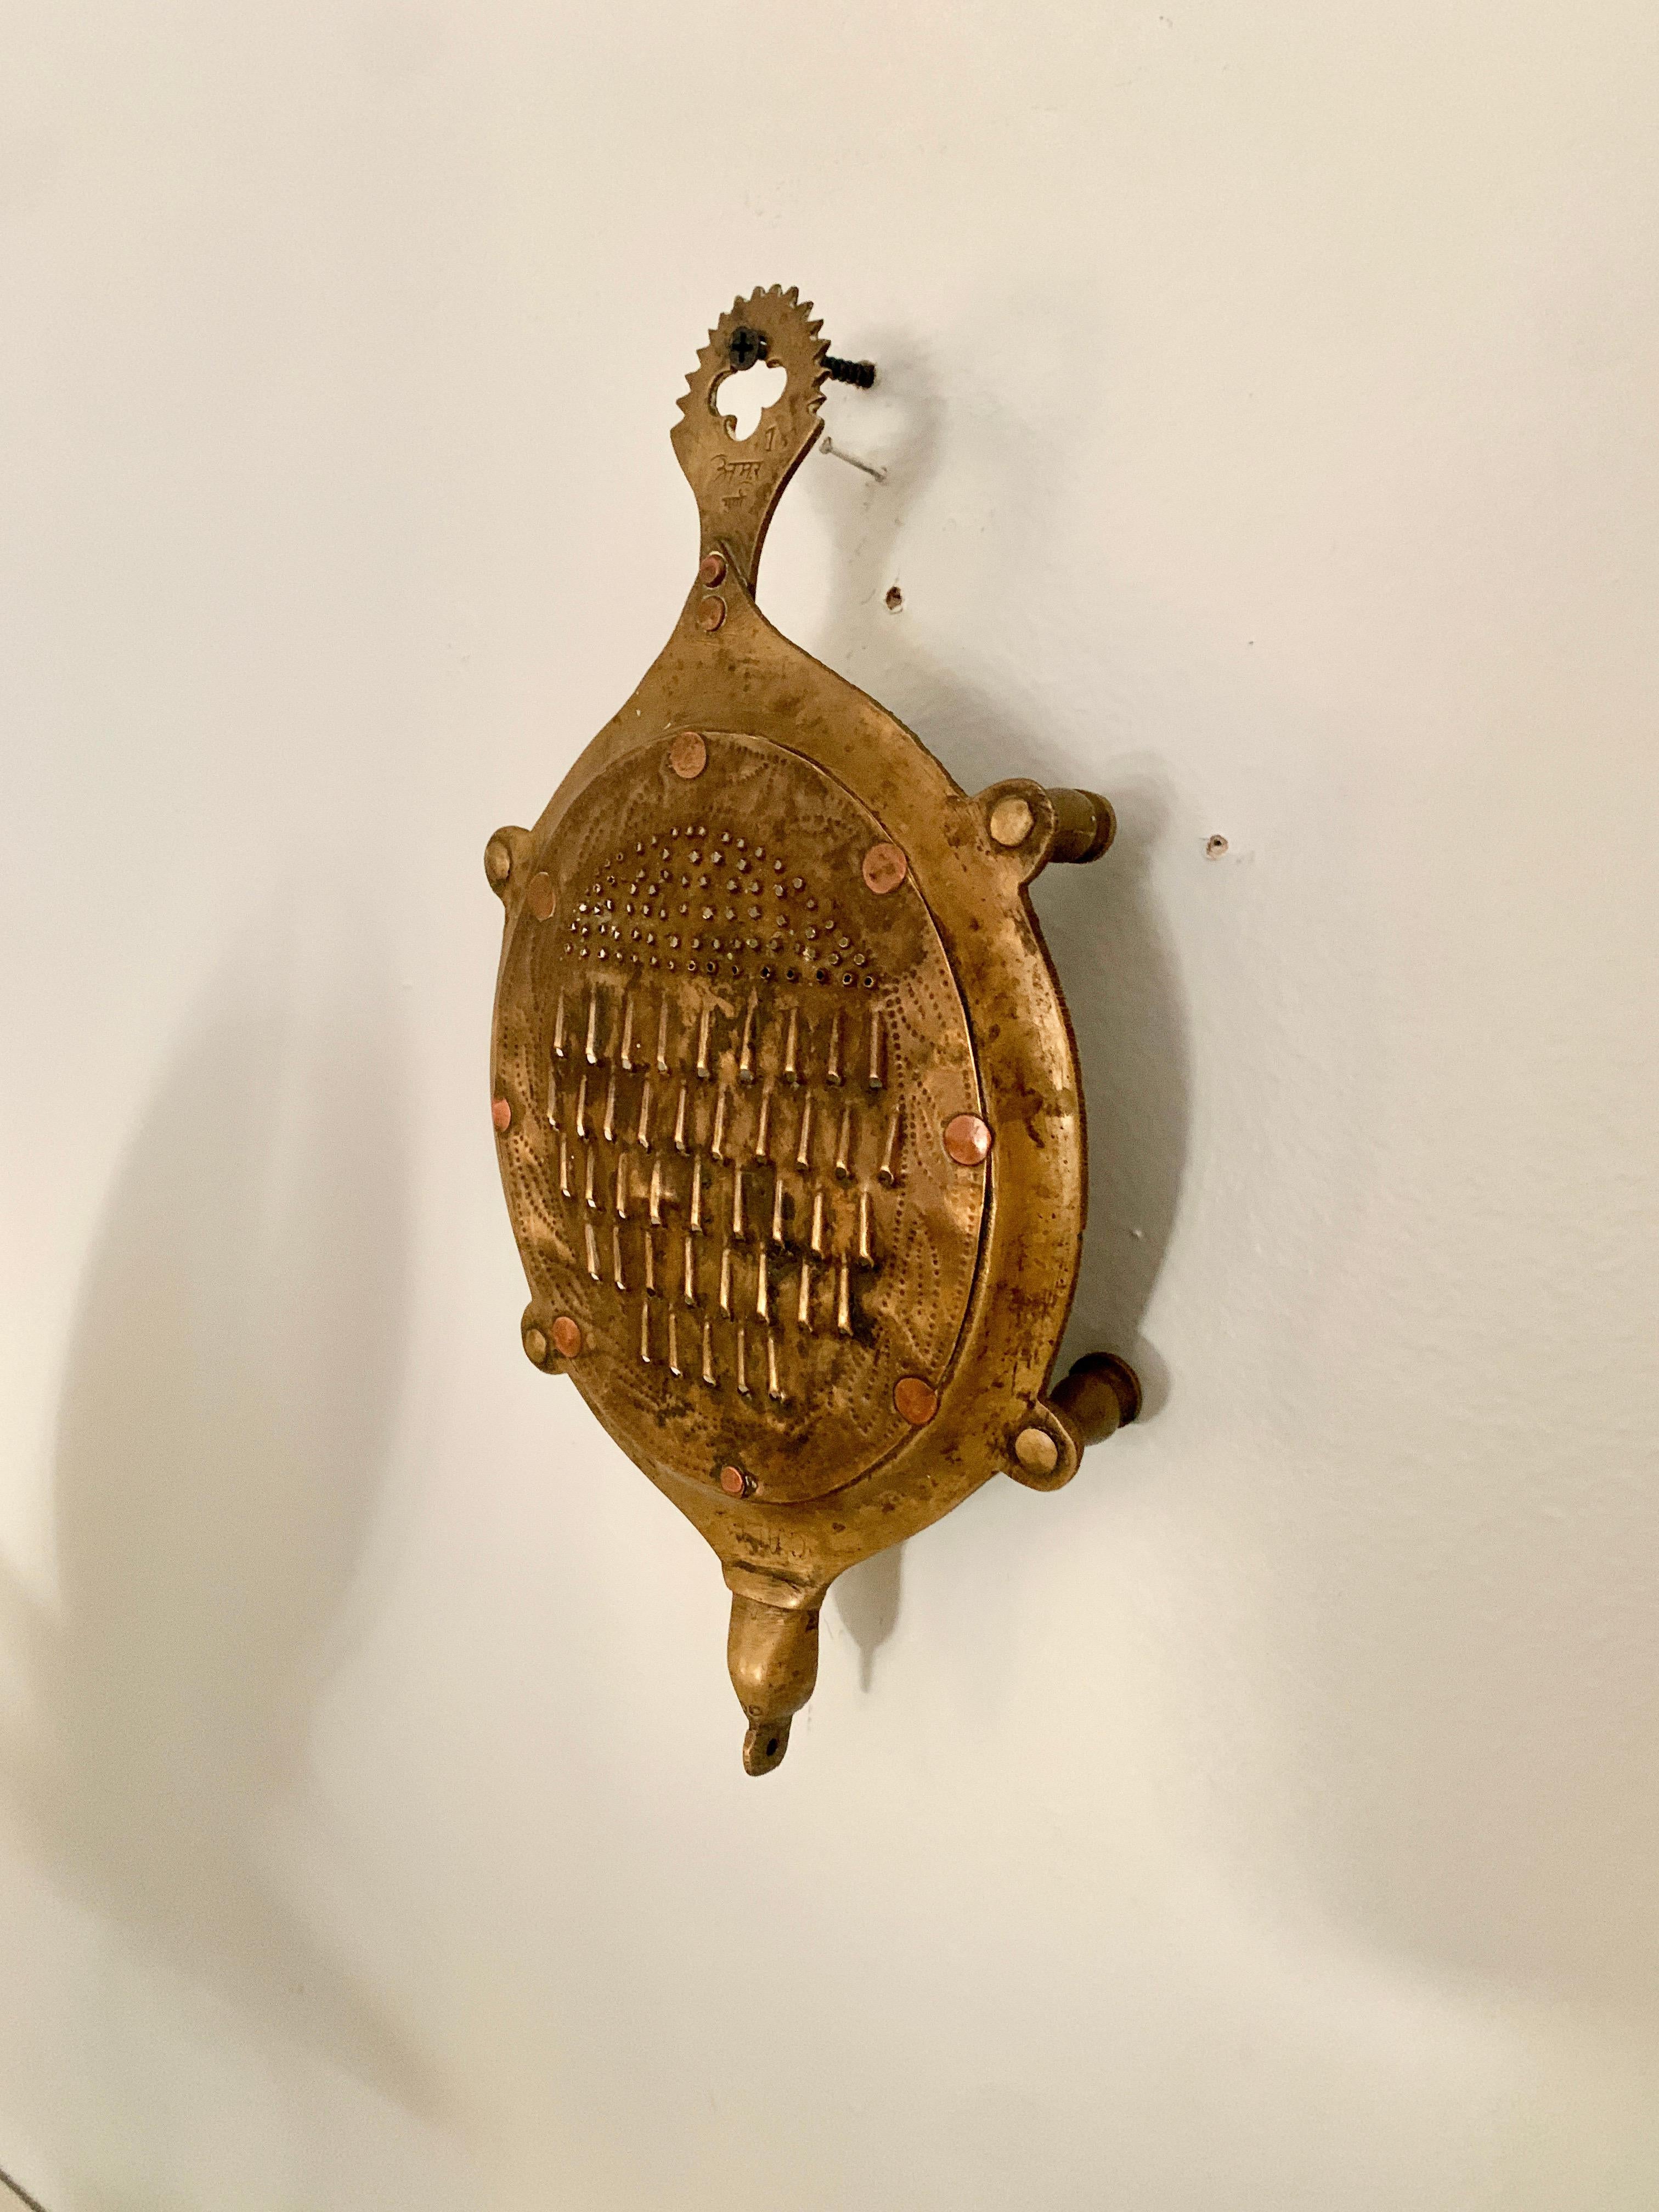 Andhra Pradesh solid brass cheese or vegetable grater in the shape of a turtle. Andhra Pradesh, in particular, has a history of outstanding metal workmanship or “Vishwakarmas”, which can be traced back to the grandeur and glory of the Kakatiya